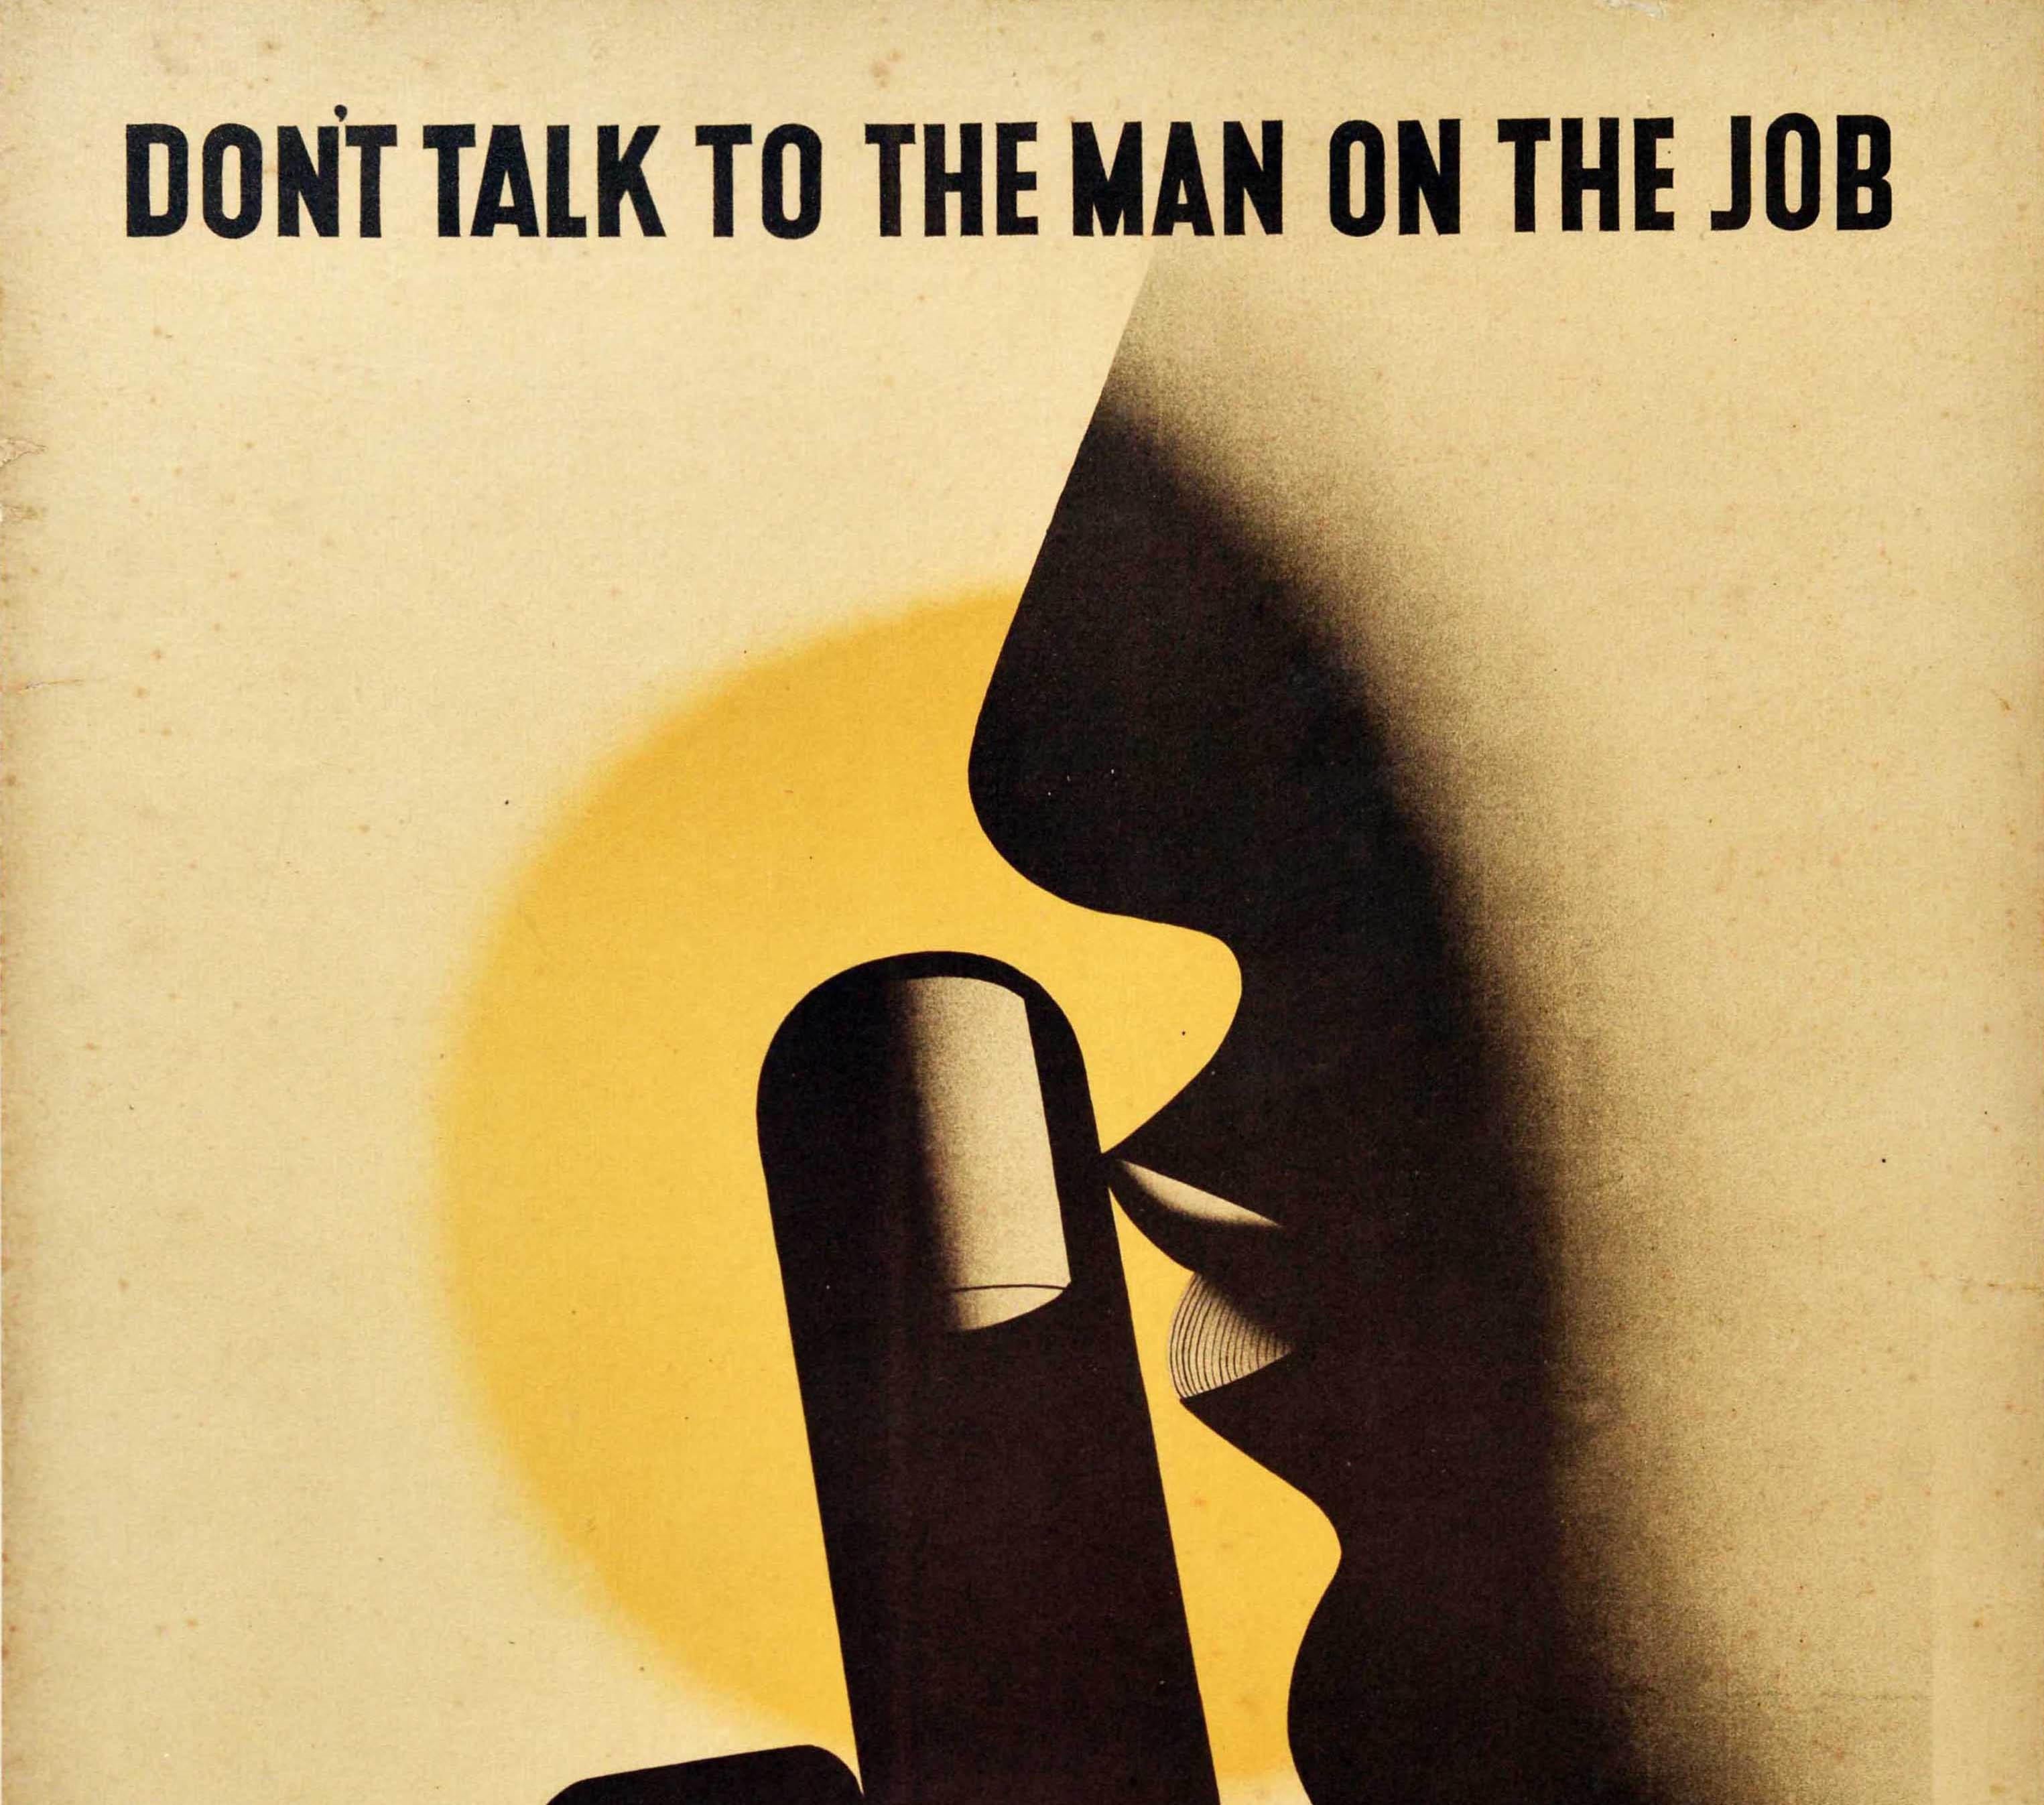 Original Vintage Poster Don't Talk To The Man On The Job Health And Safety First - Print by Eckersley-Lombers (Tom Eckersley and Eric Lombers)